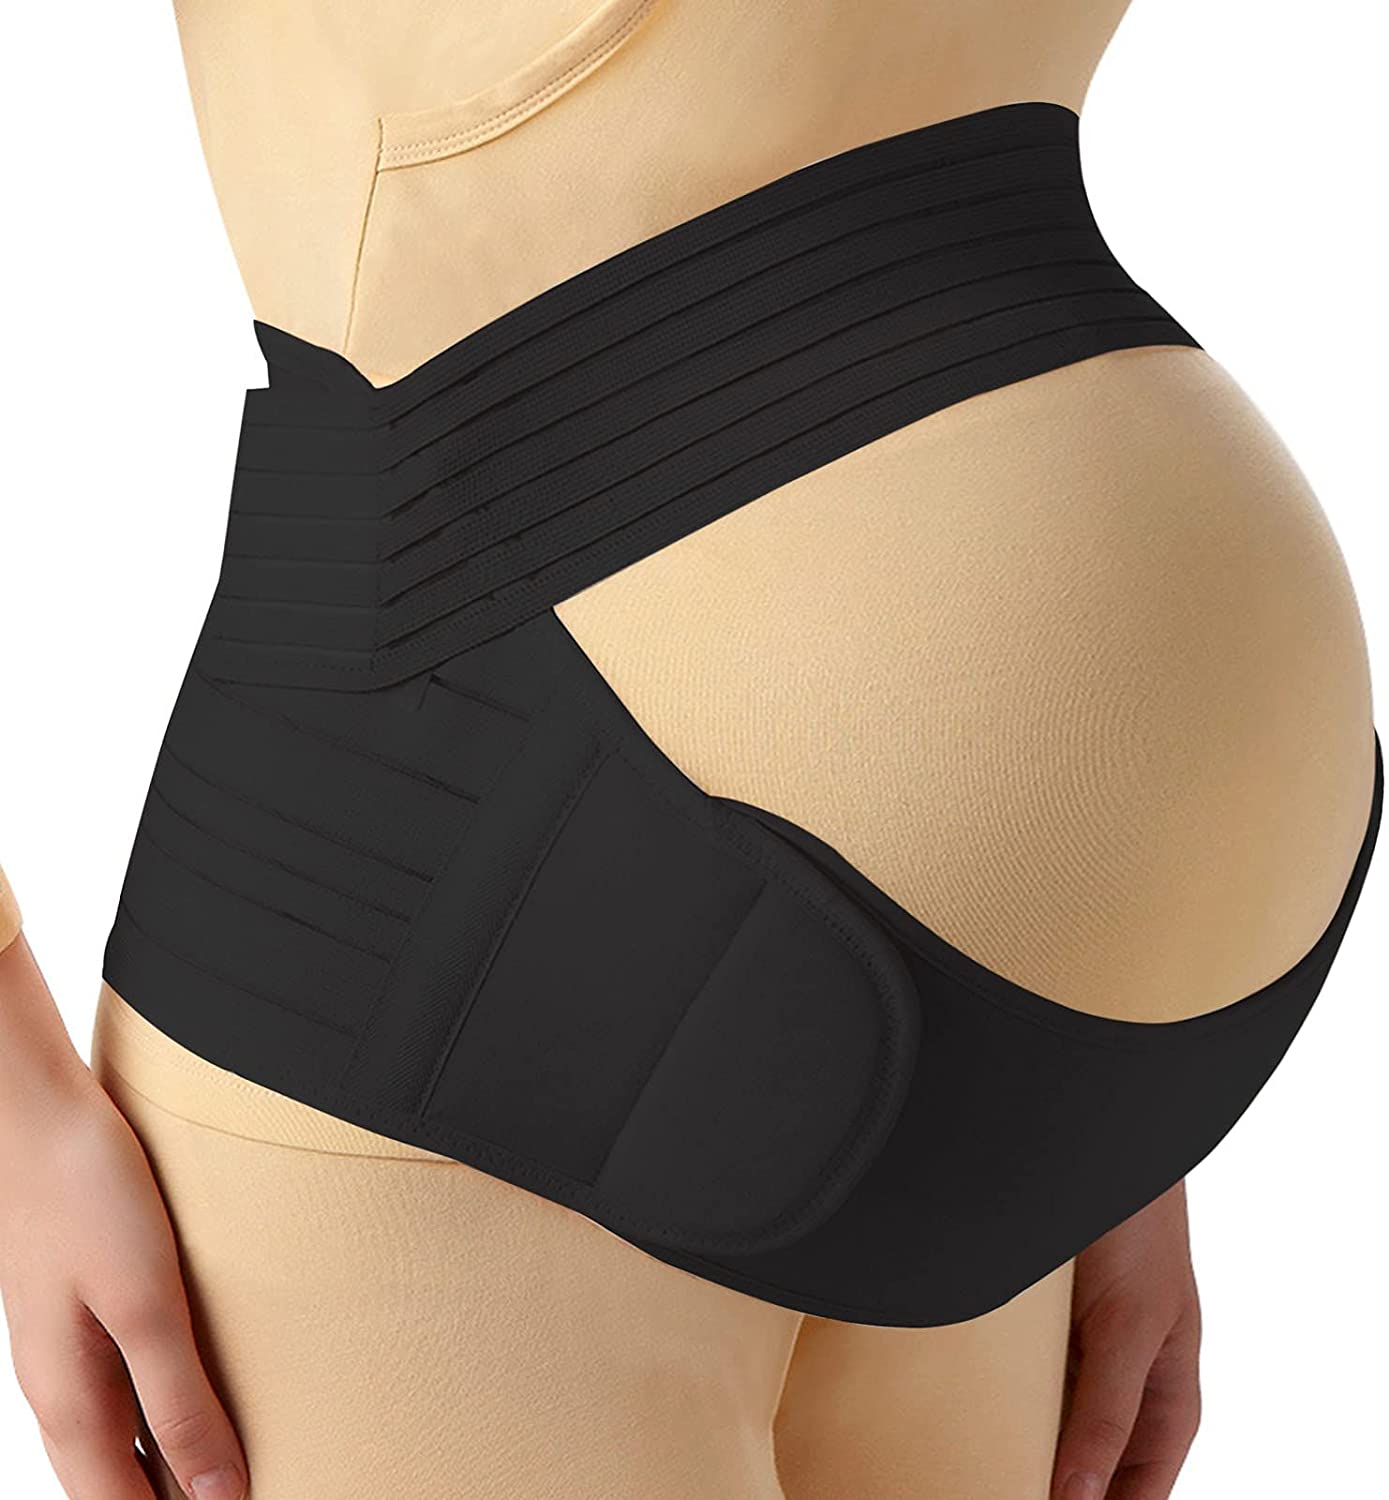 Ilfioreemio Pregnancy Belt, 3-in-1 Maternity Belt Pregnancy Support Band with Belly Band Brace for Pain Relief and Postpartum Recovery, Lightweight Breathable Adjustable Waist/Back/Abdomen Band - image 1 of 7